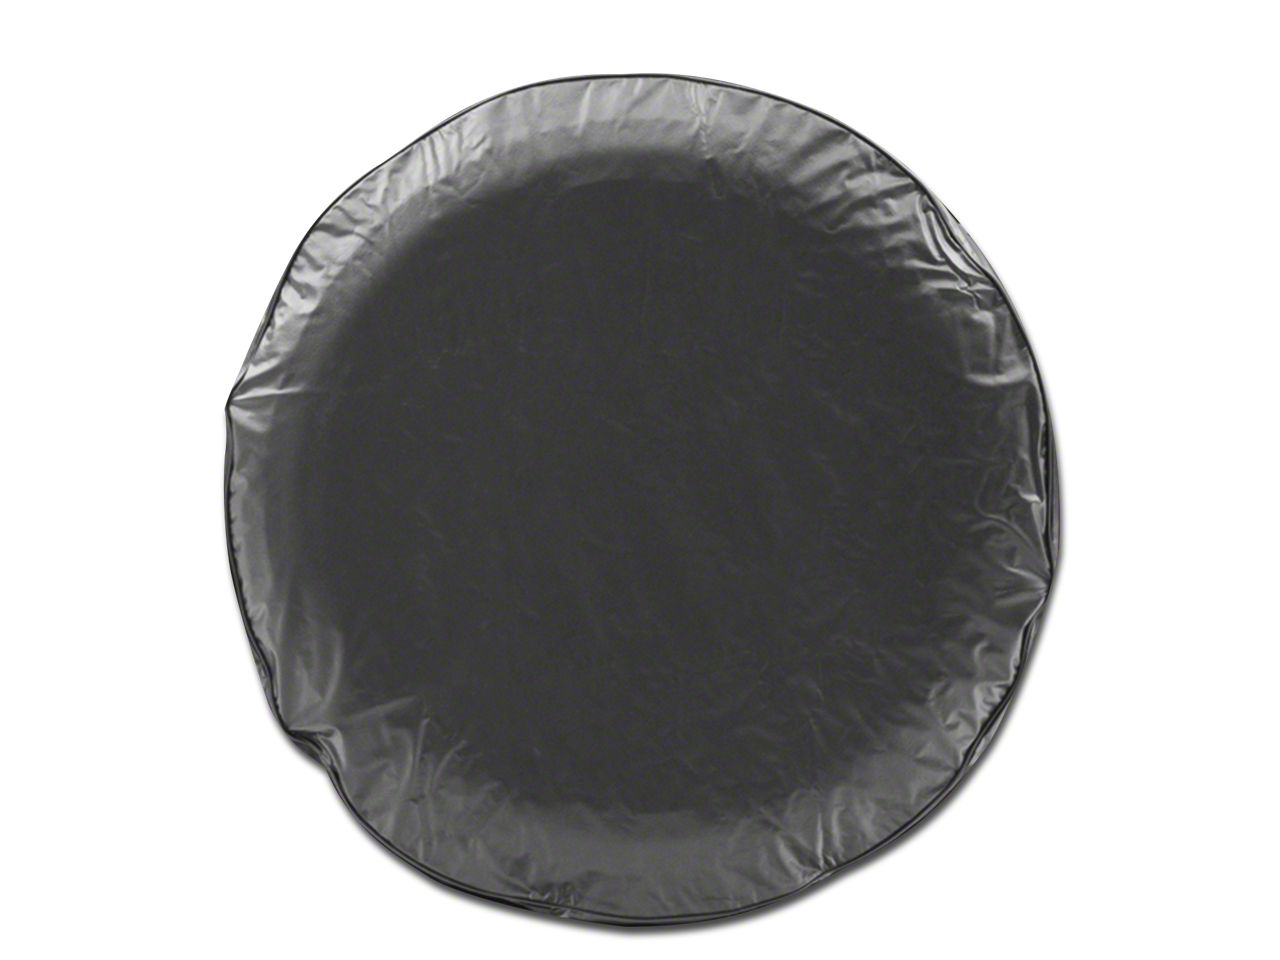 Ram 1500 Tire Covers